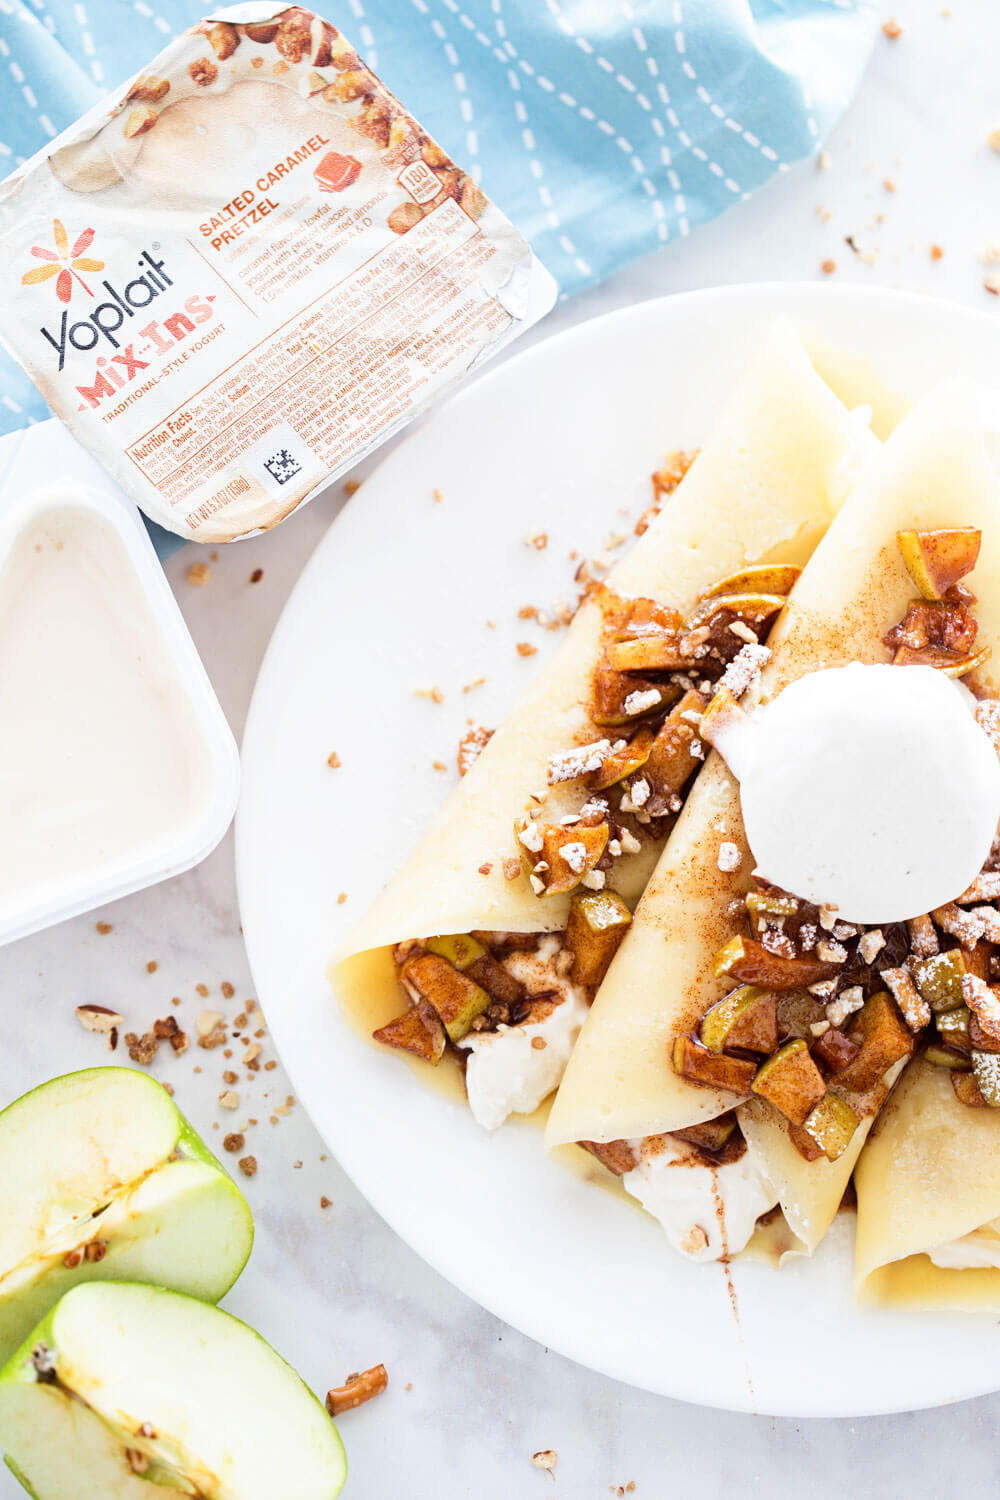 Salted Caramel Apple Crepe Recipe - the perfect breakfast OR dessert recipe for fall! Yum!